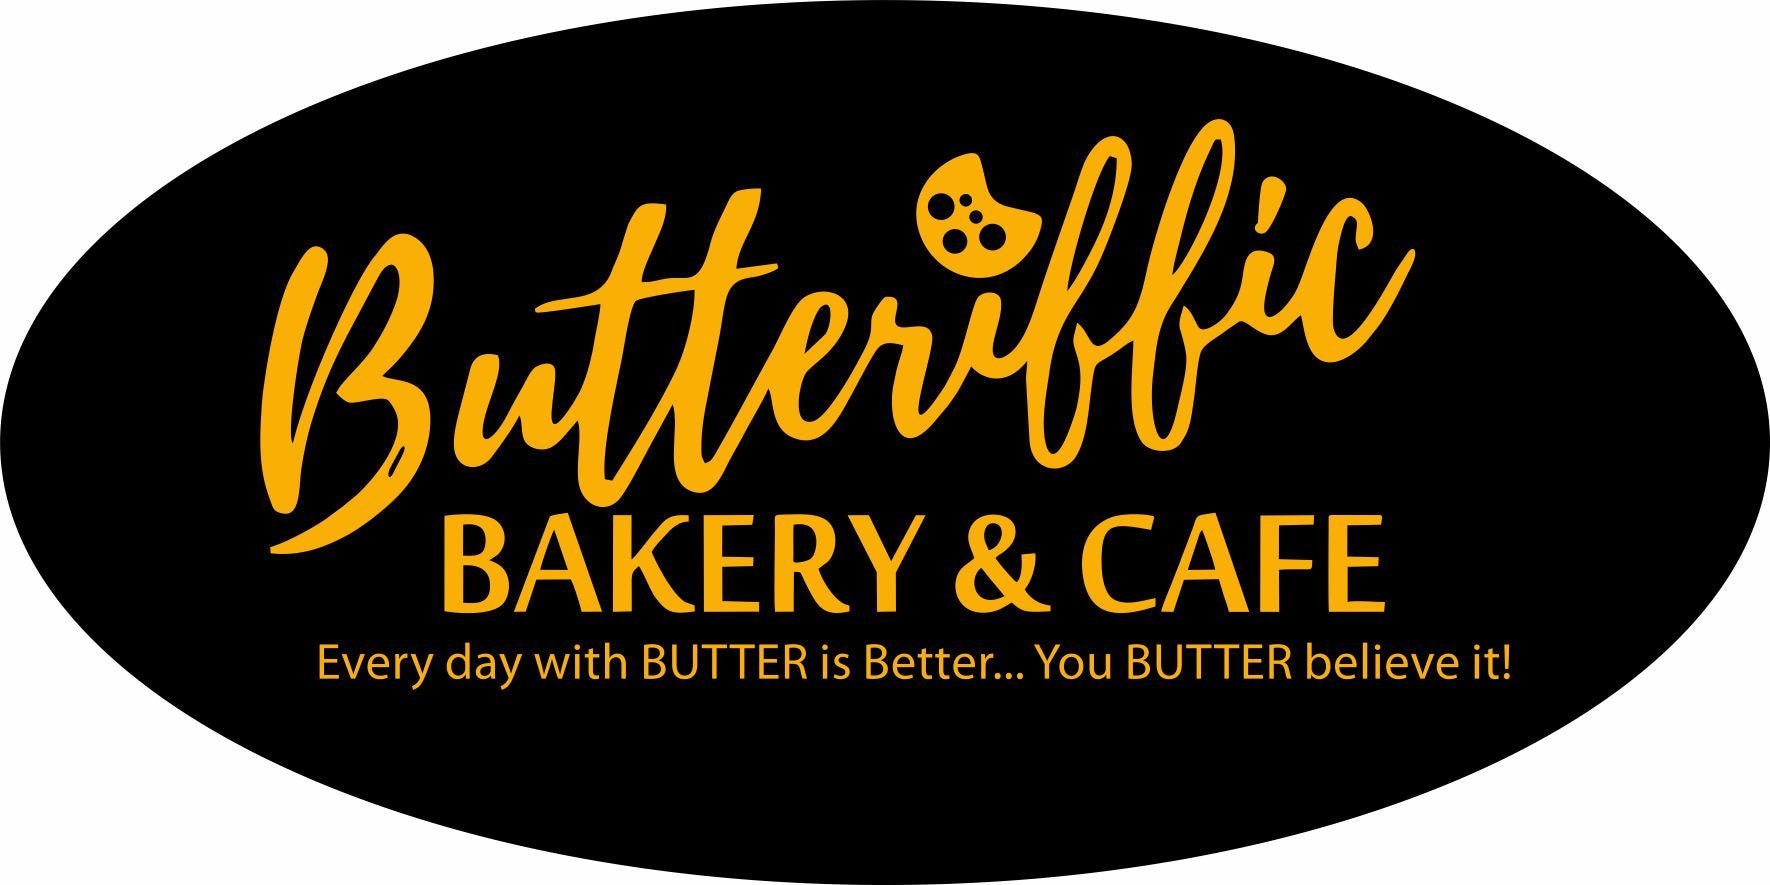 BUTTERIFFIC BAKERY & CAFE §